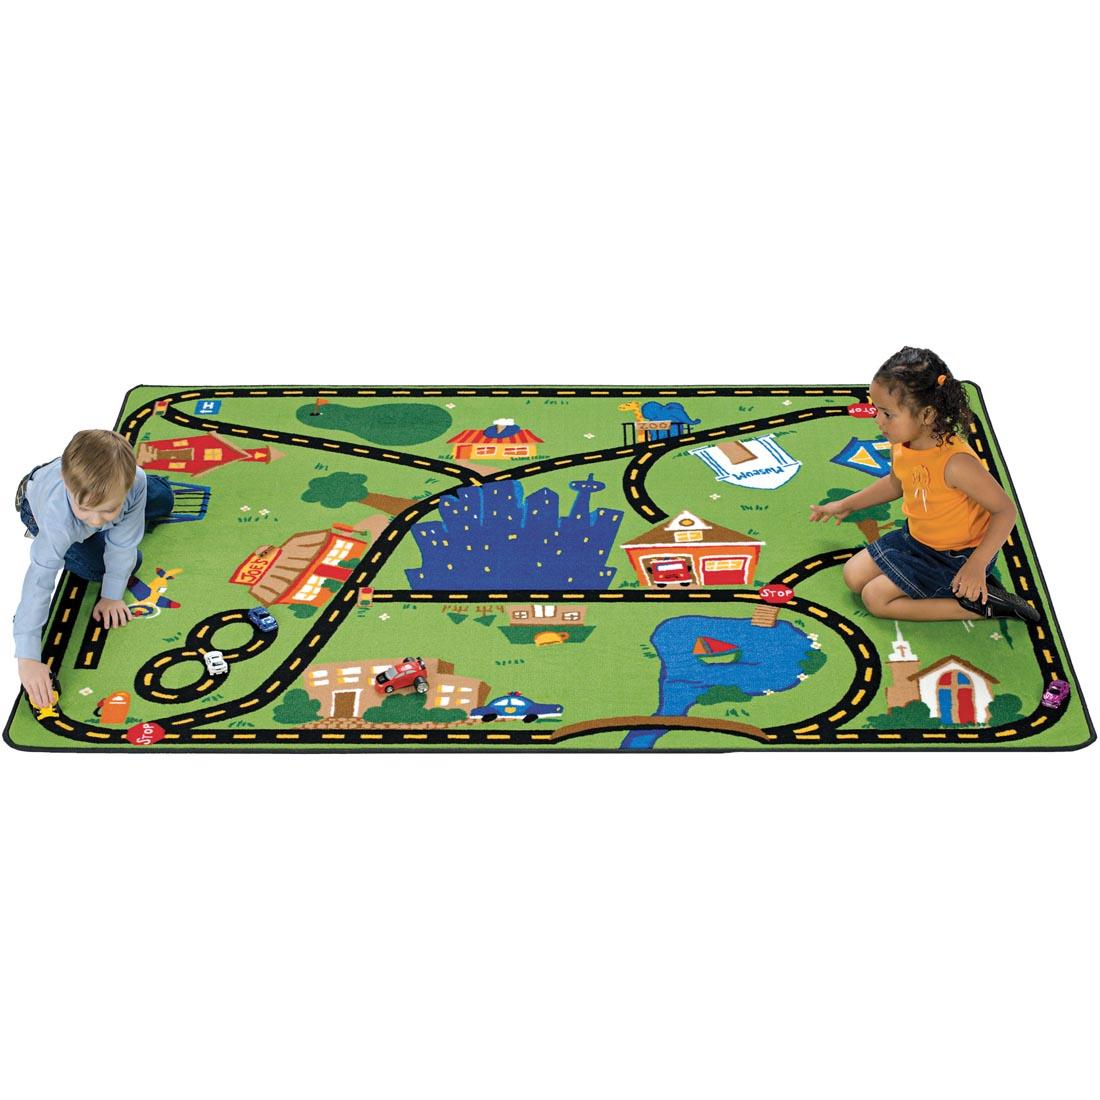 Children playing with cars on the roads printed on the Cruisin' Around The Town Rug by Carpets For Kids